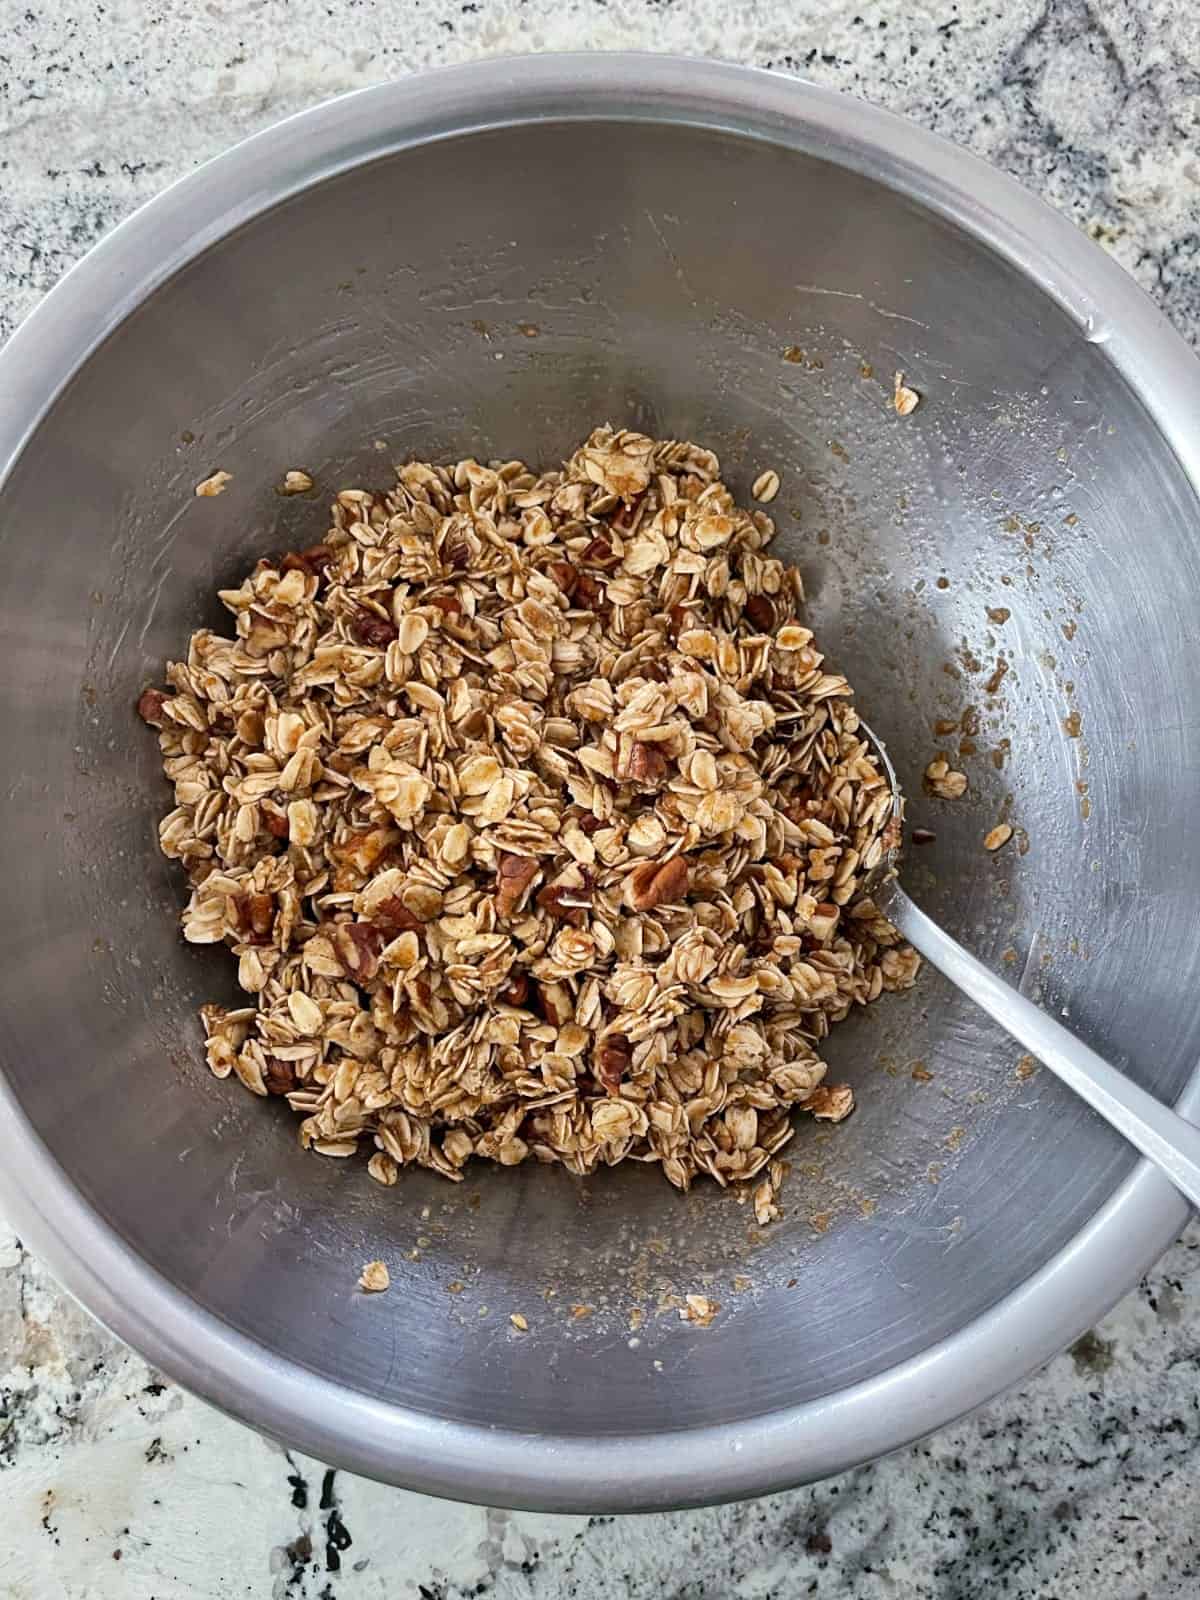 Mixing granola ingredients, including rolled oats, chopped pecans, flax meal, cinnamon, apple juice, brown rice syrup, oil and vanilla in mixing bowl with spoon.